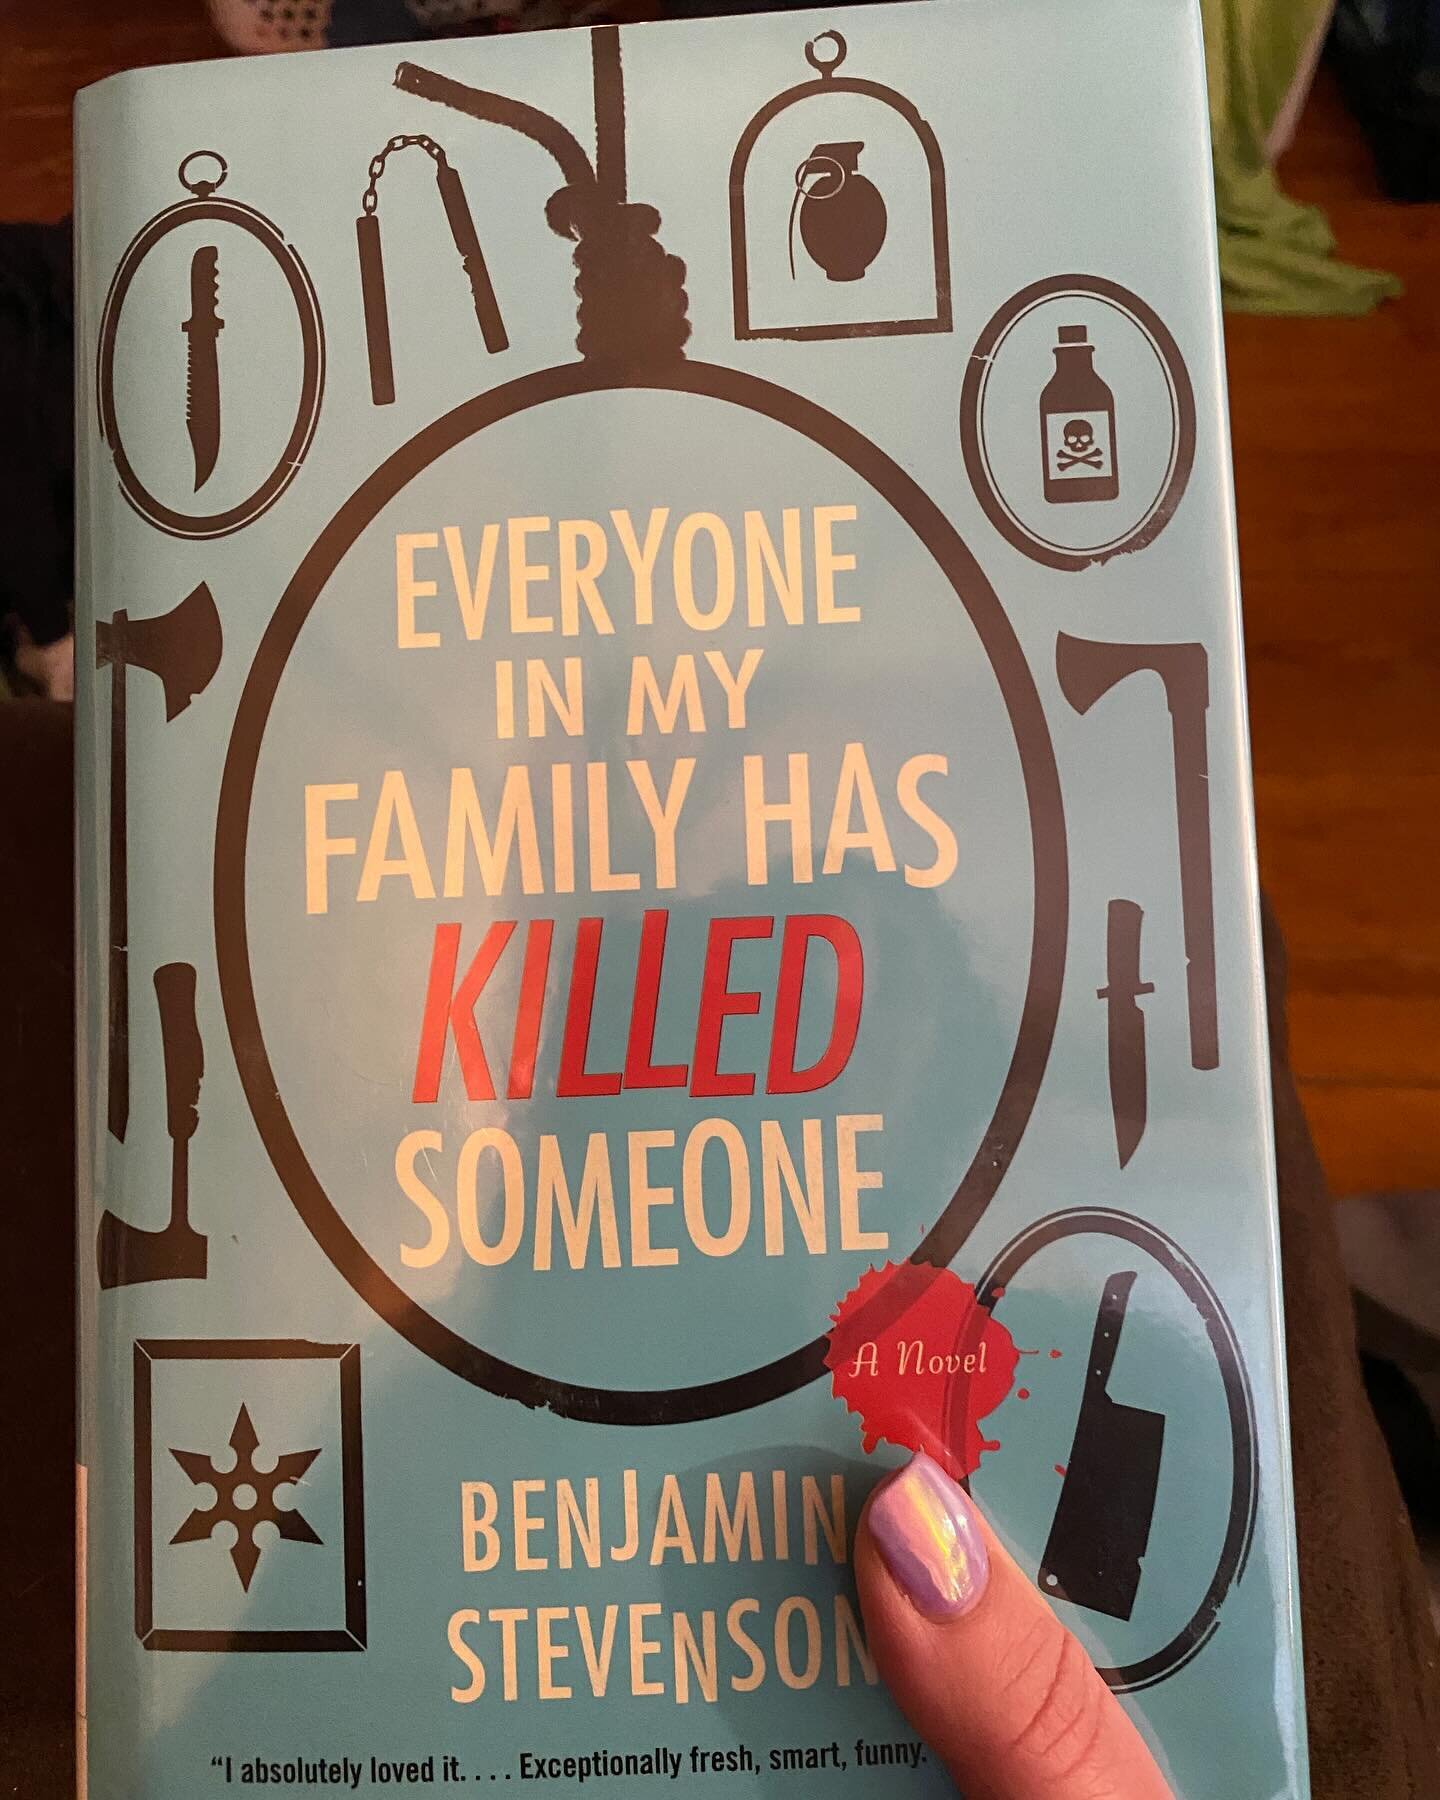 IT&rsquo;S THE WEEKEND! And I&rsquo;m starting a new read #everyoneinmyfamilyhaskilledsomeone borrowed from the @allentownnjpubliclibrary branch of the @moncolibrary system 

And procrastinating going to my office because I can&rsquo;t finish my curr